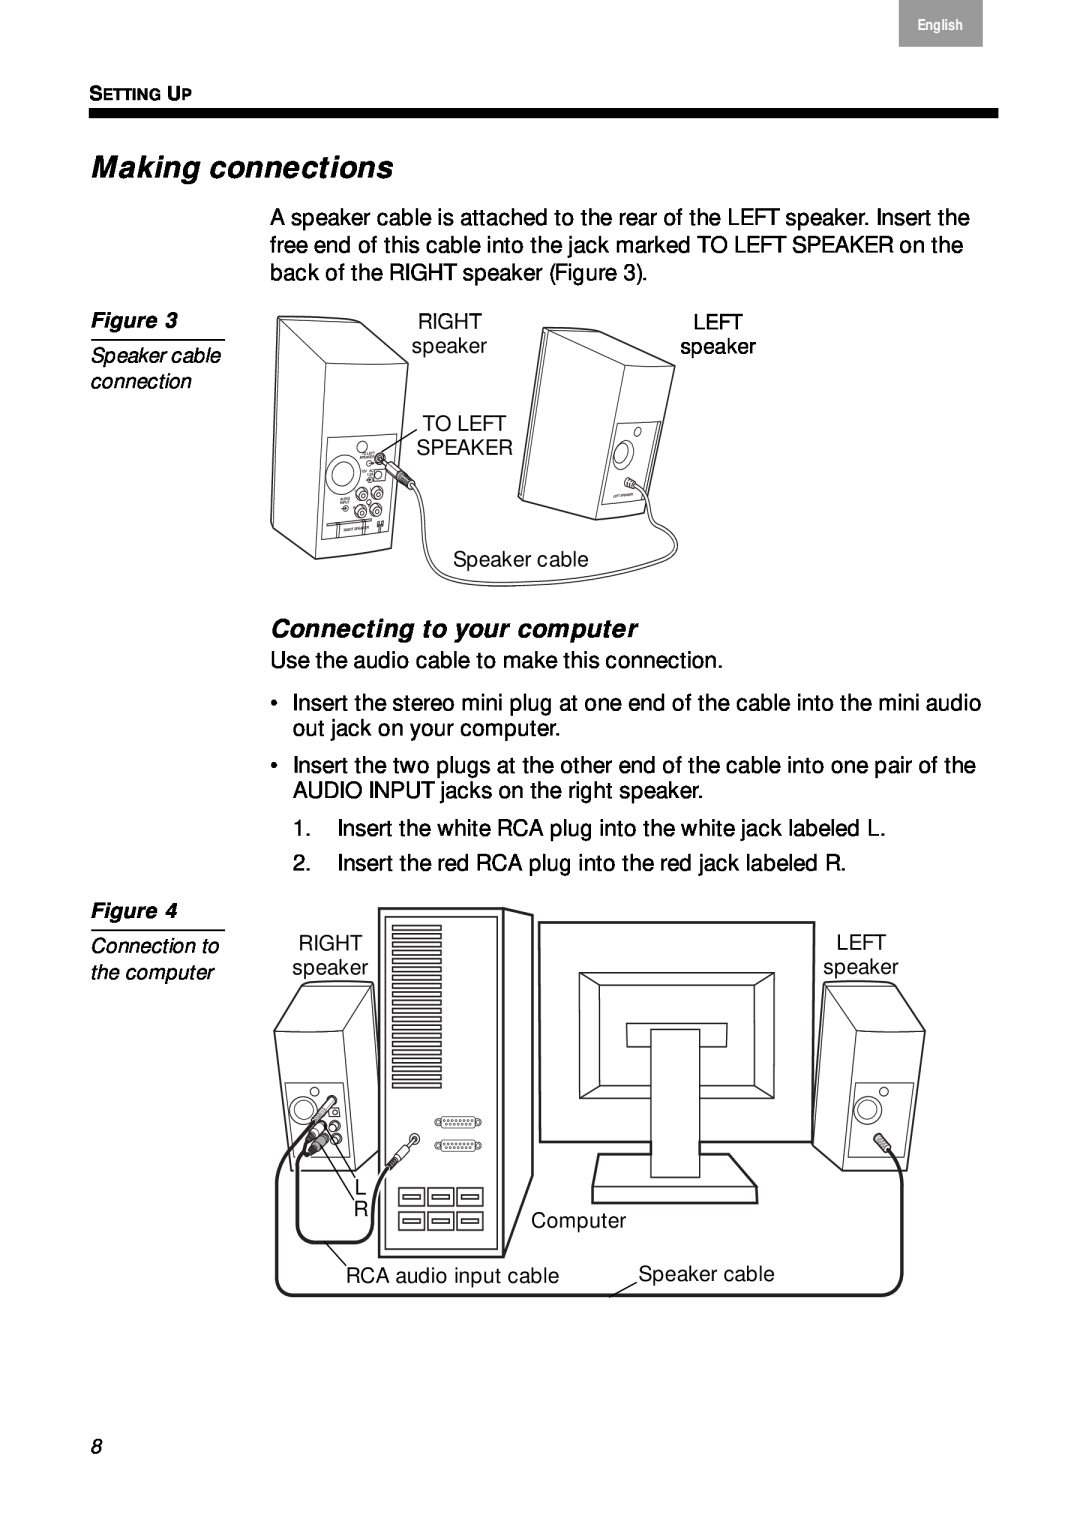 Bose 2 Series II, 40274 manual Making connections, Connecting to your computer 